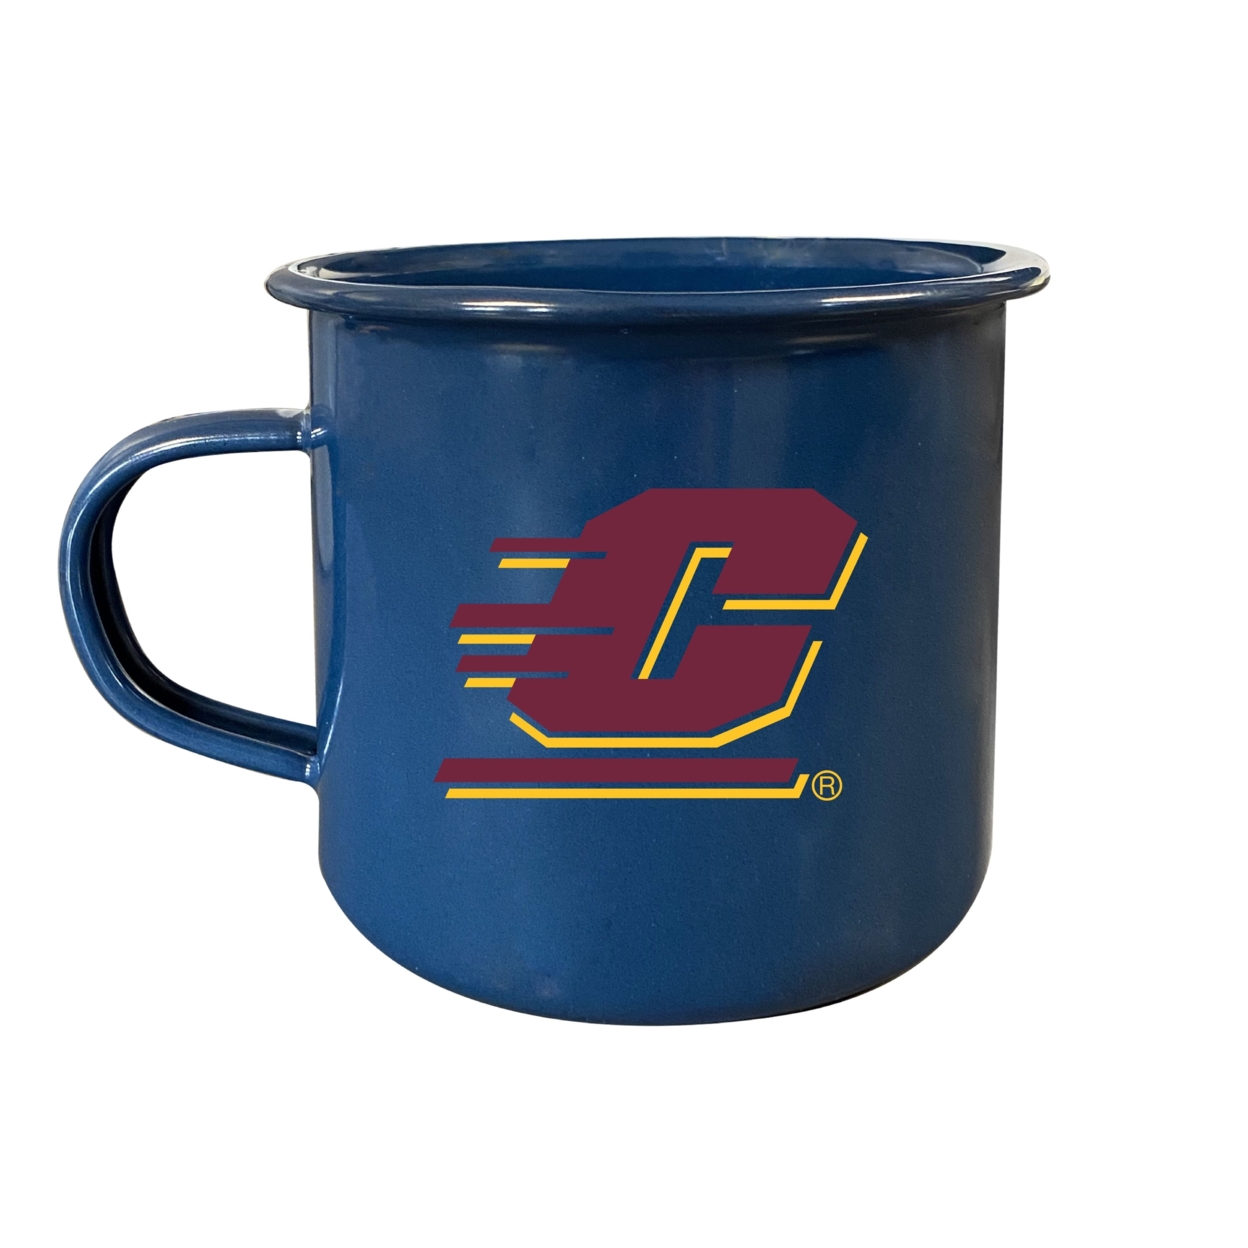 Central Michigan University Tin Camper Coffee Mug - Choose Your Color - White